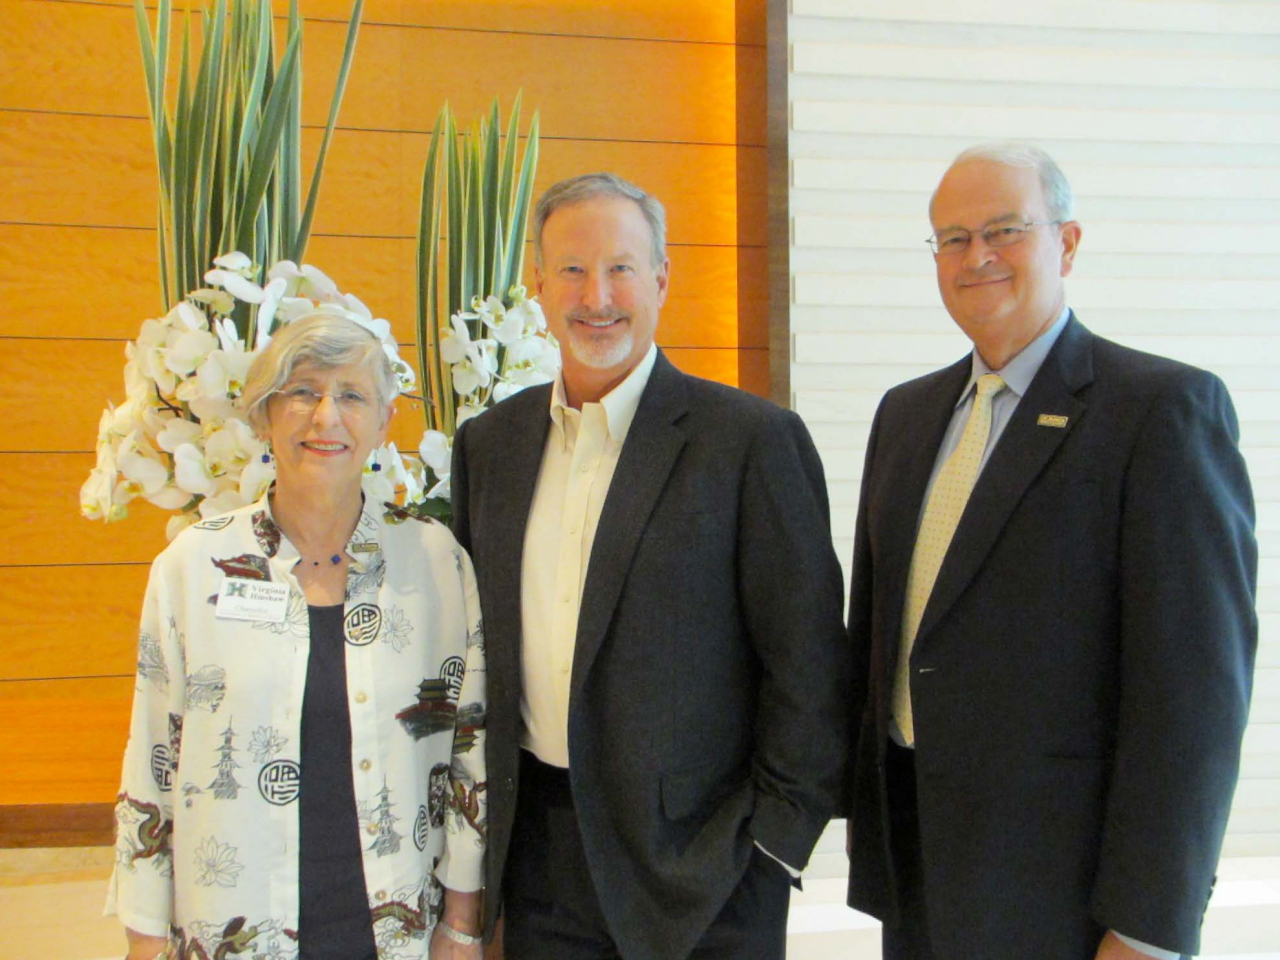 Chancellor Virginia Hinshaw, James Hassett and Dean Vance Roley